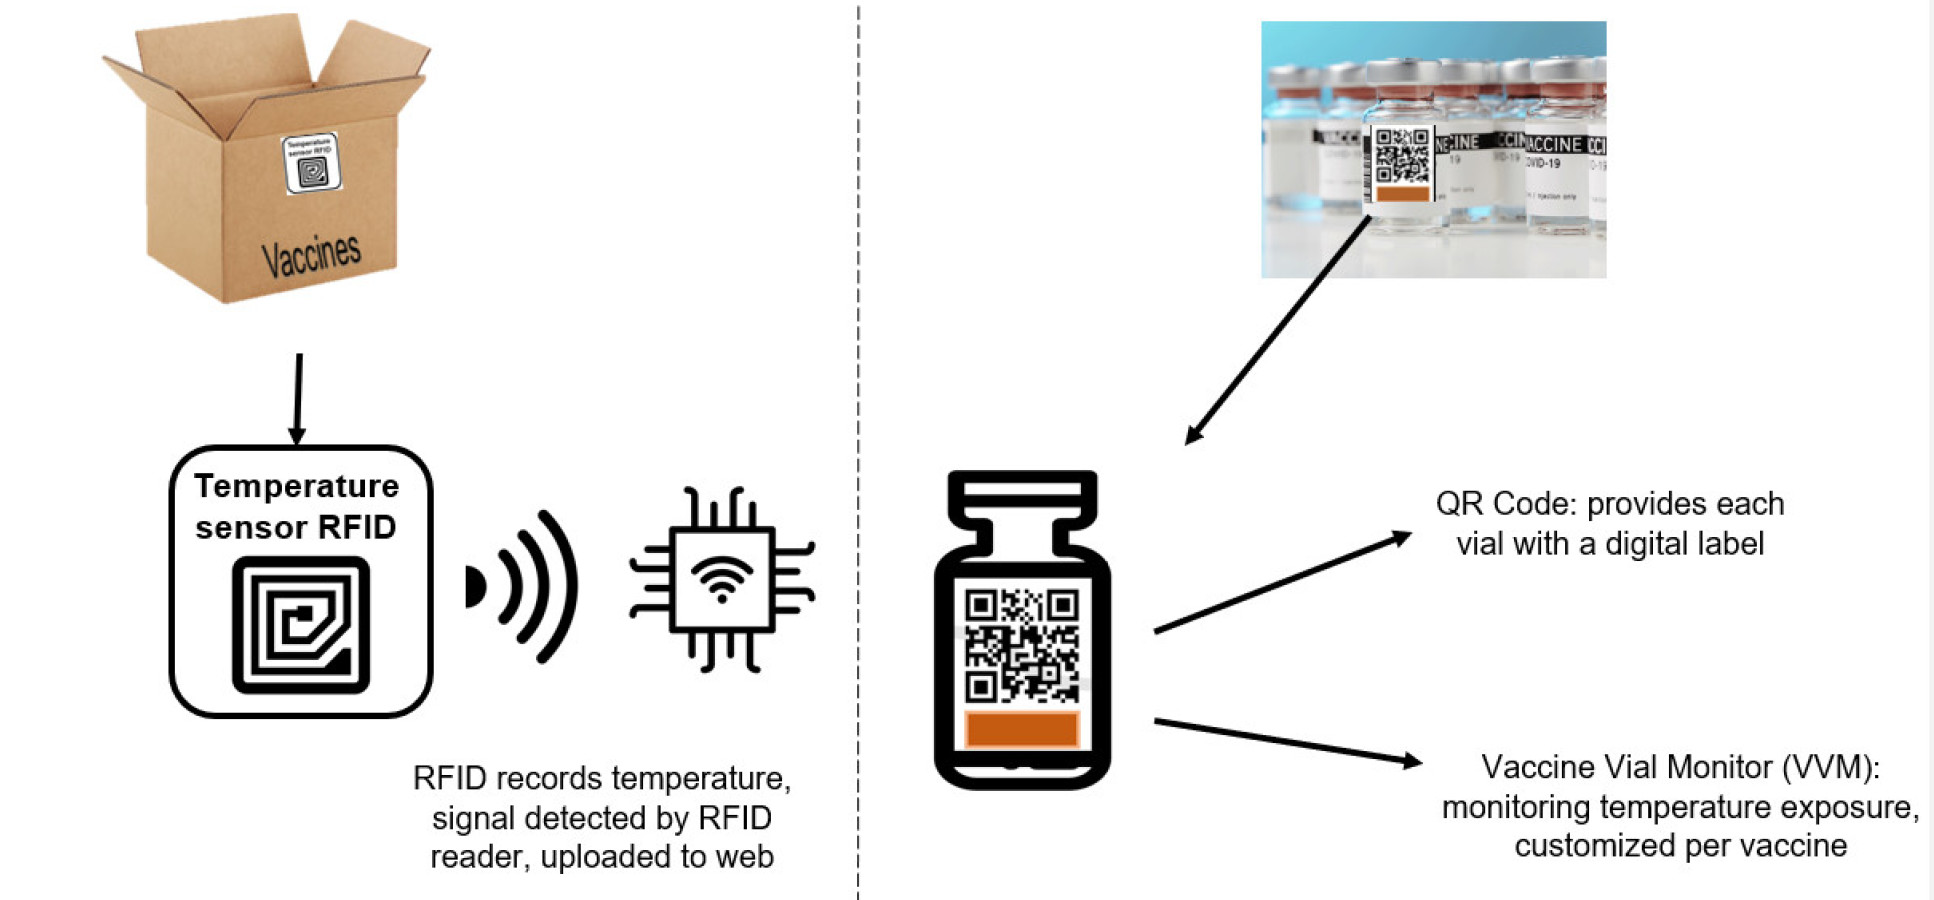 Images on the left show a close-up of the RFID temperature sensor for the vaccine boxes, which records the surrounding temperature and uploads this data to the web. One the right there's an illustration of the vaccine vial, including a QR code which is a digital label, and a coloured strip, which is the Vaccine Vial Monitor (VVM) monitoring temperature exposure, customised for each type of vaccine